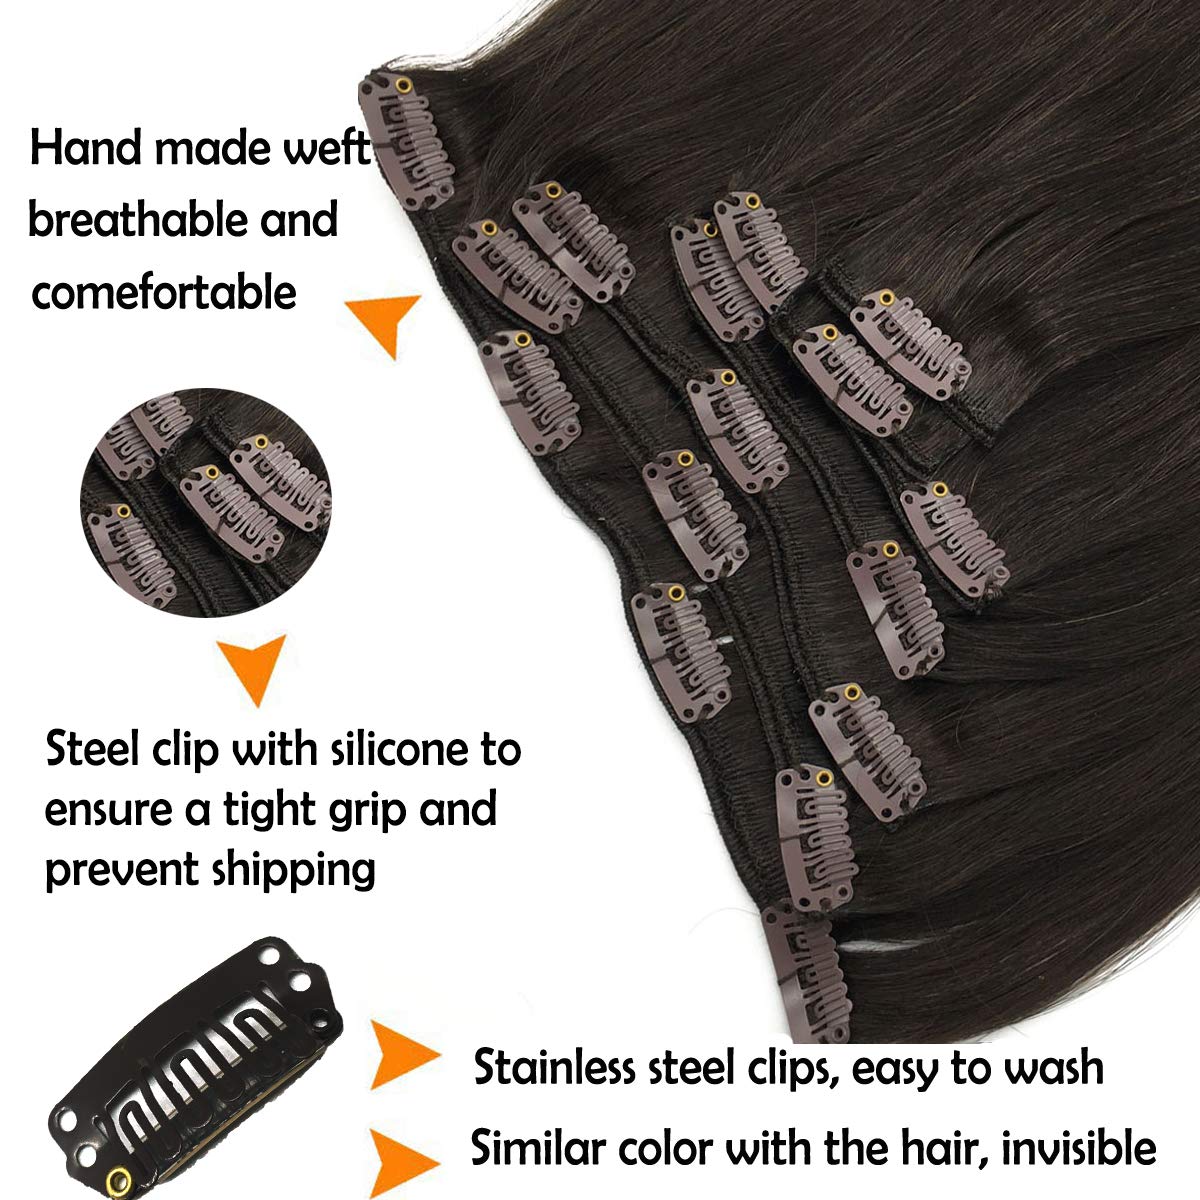 20 Inch 7pcs Clip in Hair Extensions Chocolate Brown